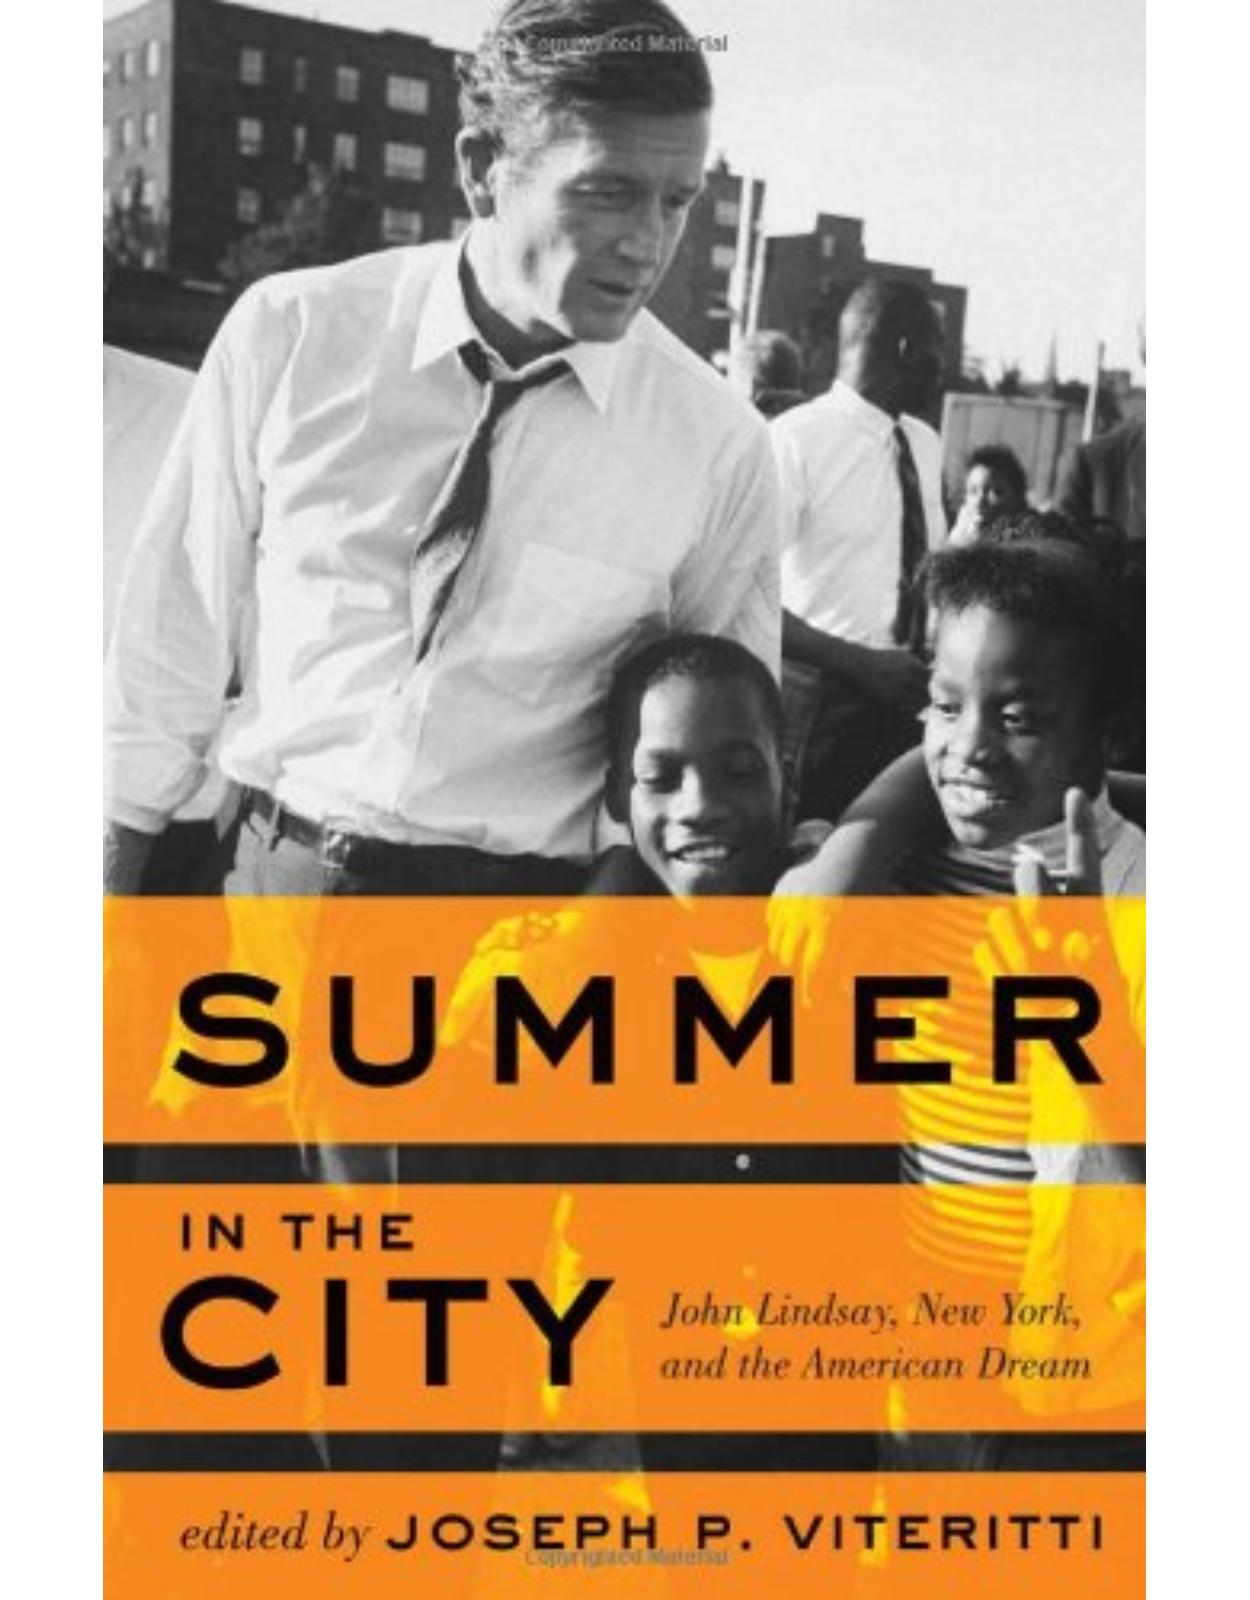 Summer in the City, John Lindsay, New York, and the American Dream